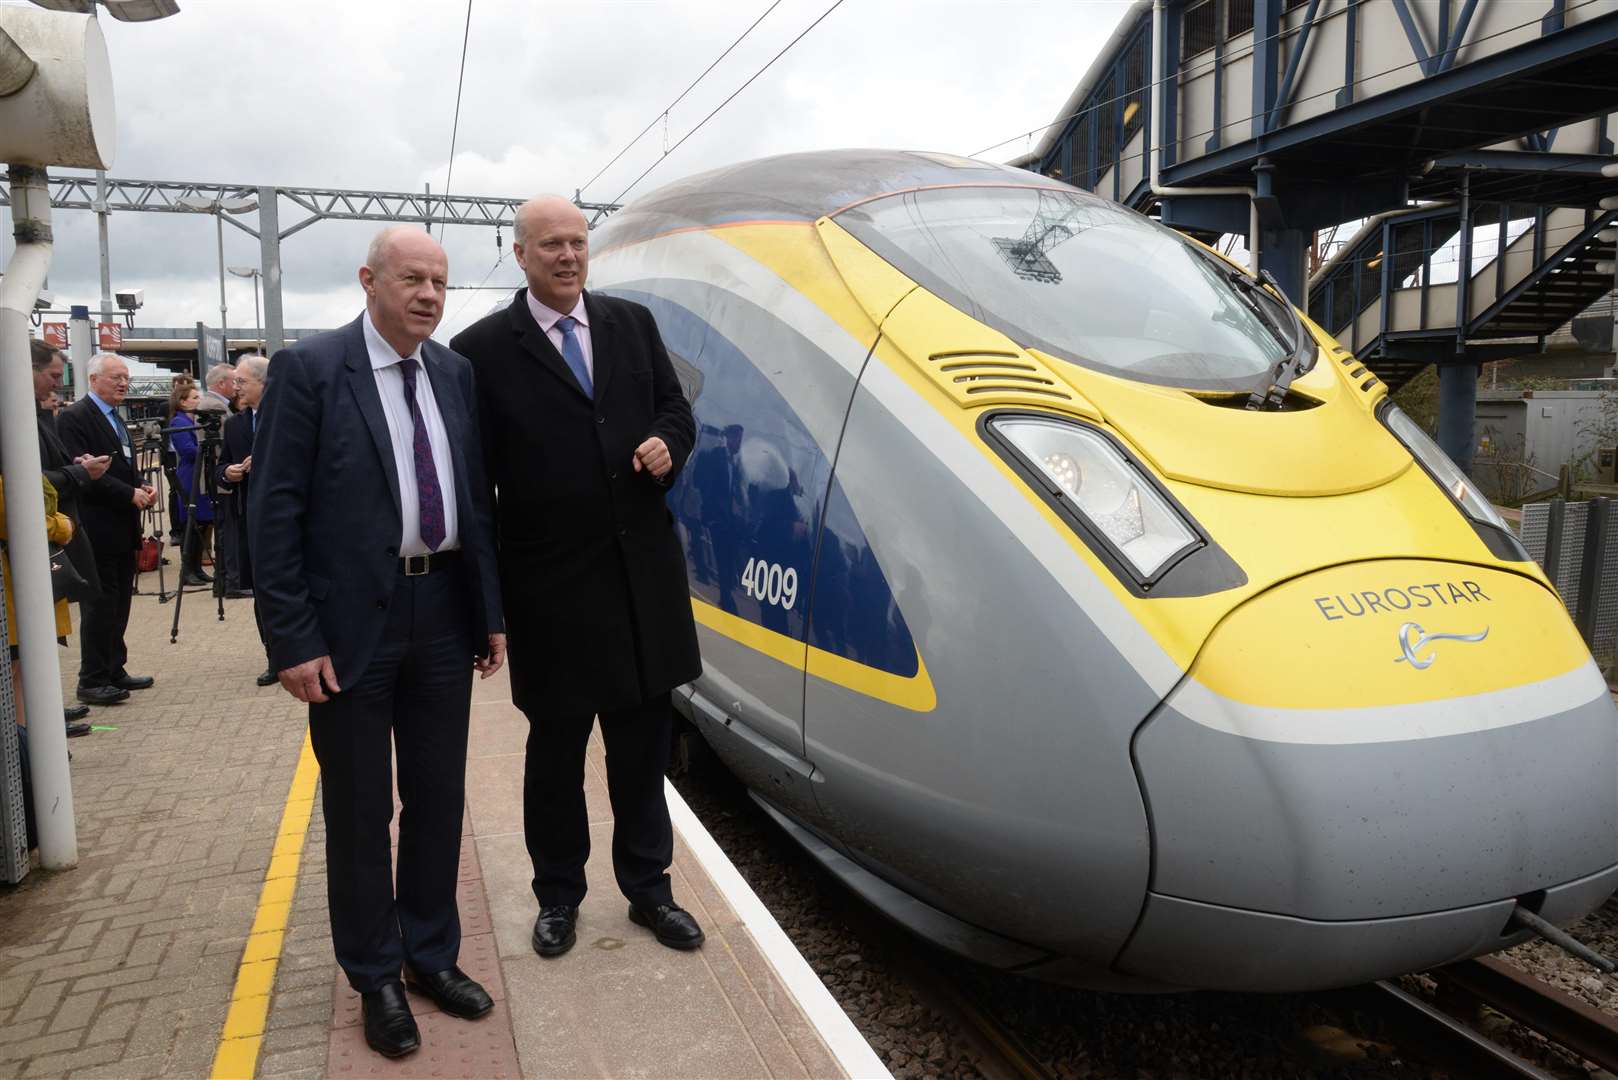 Damien Green MP and Secretary of State for Transport Chris Grayling inspect one of the new e320 class trains at Ashford International station on Tuesday. Picture: Chris Davey (1370925)